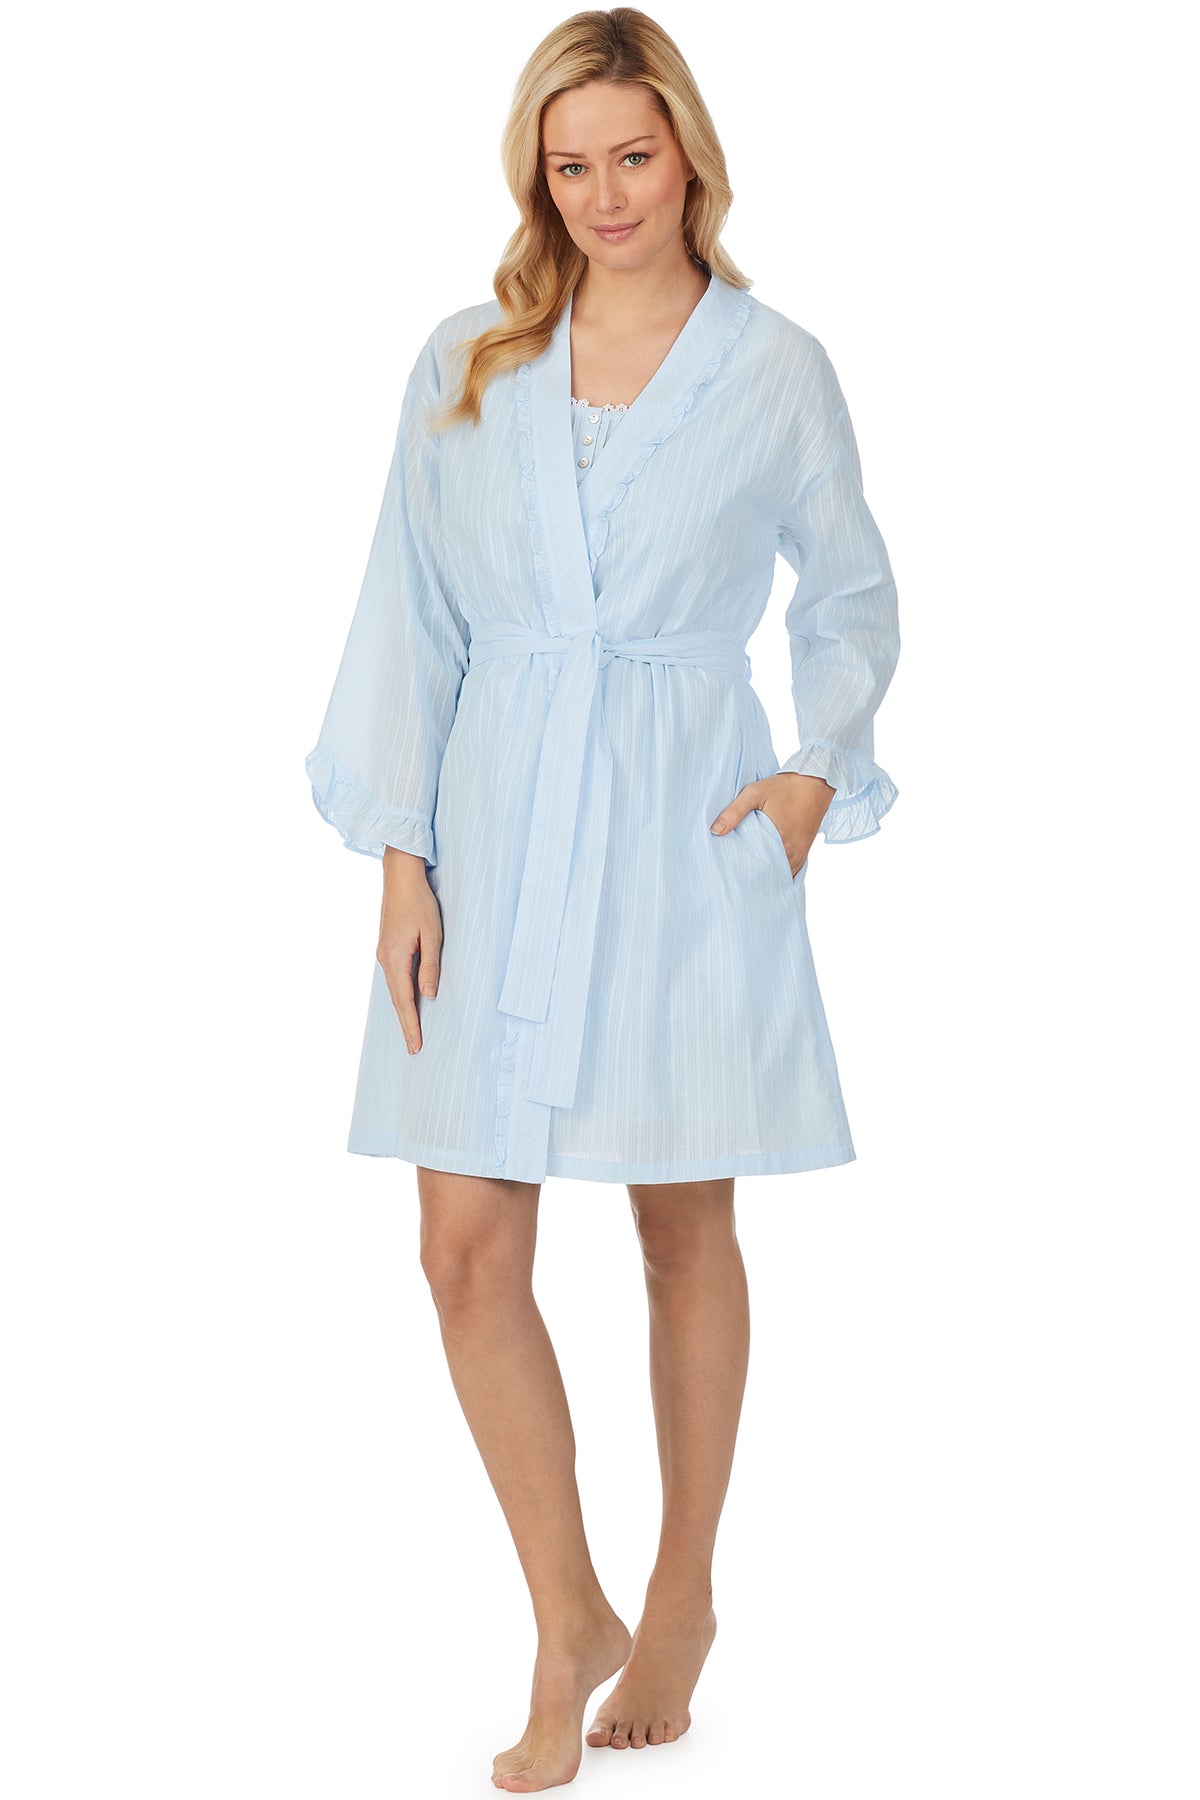 A lady wearing blue short wrap robe with stripe texture